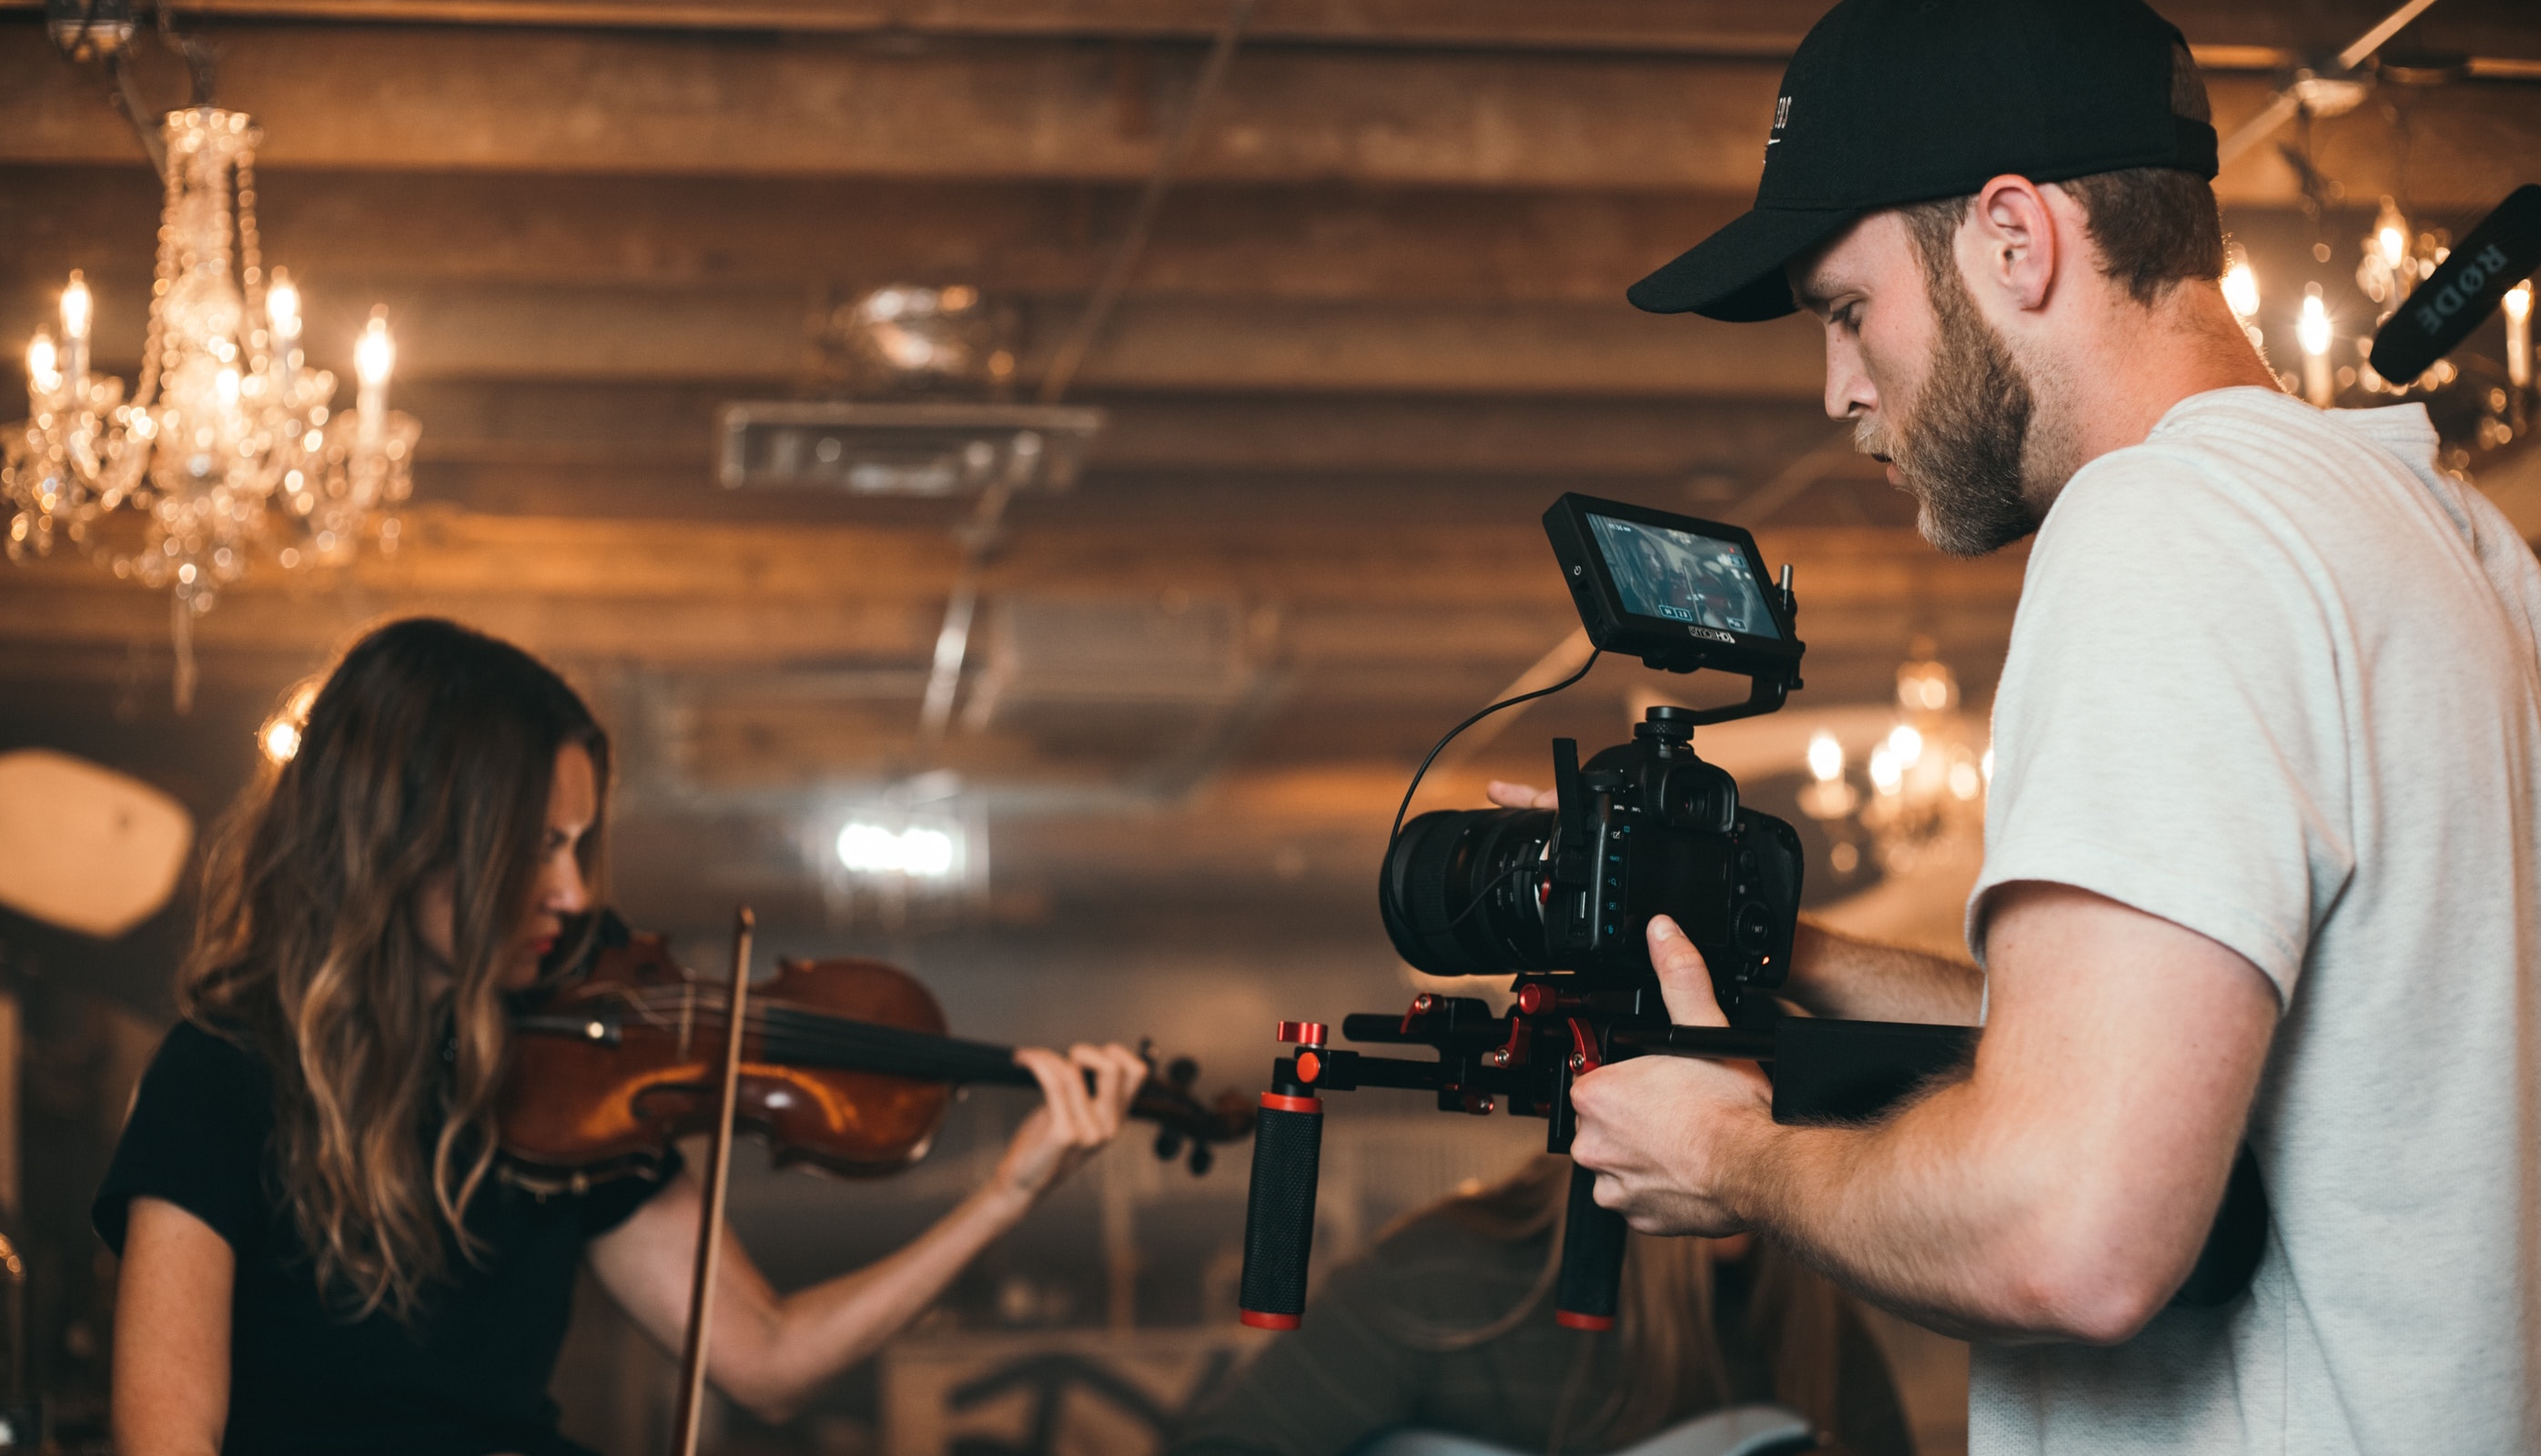 How to make an impactful music video on a budget